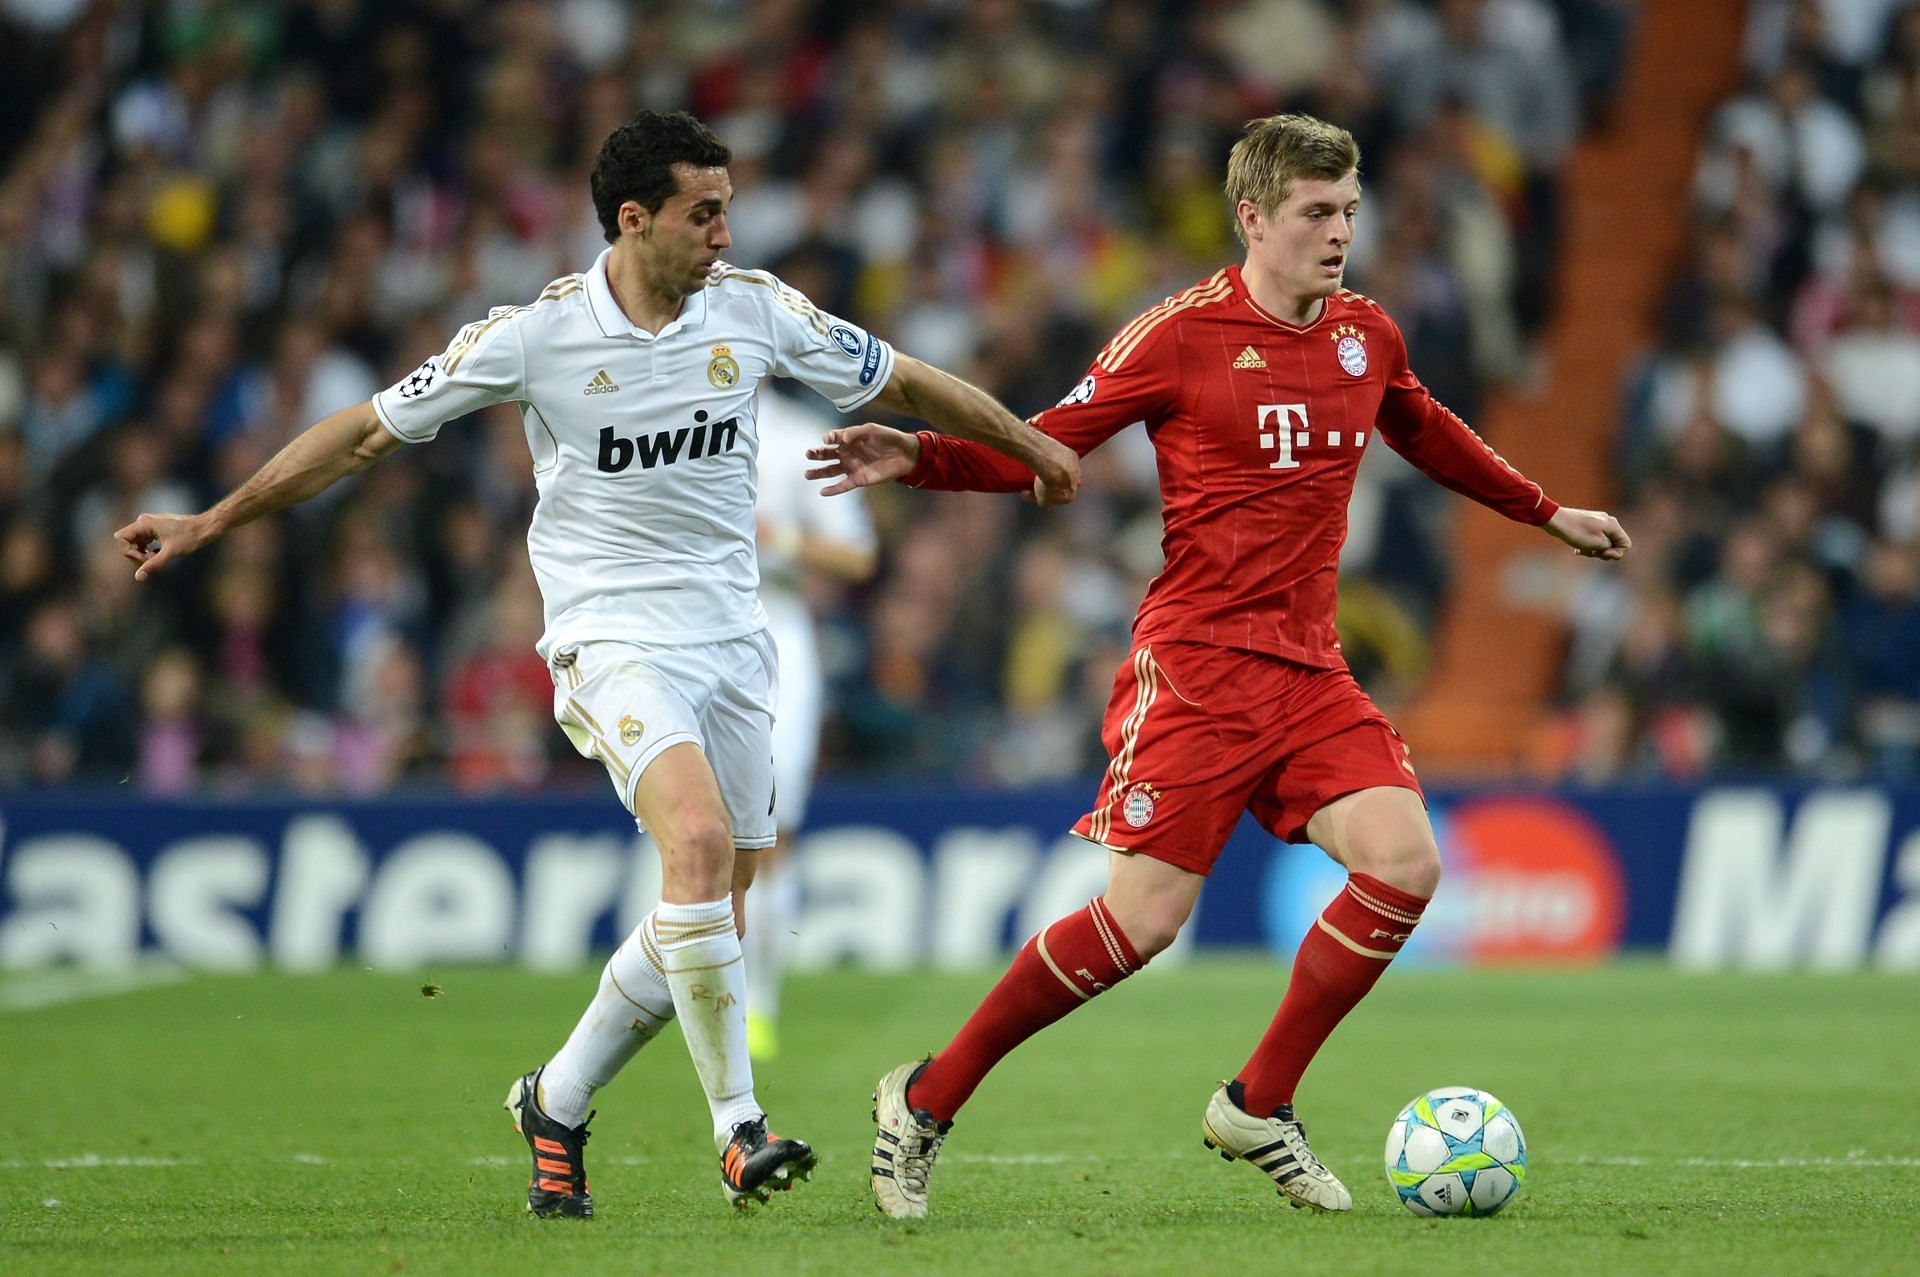 Toni Kroos made his debut for Bayern Munich in 2007